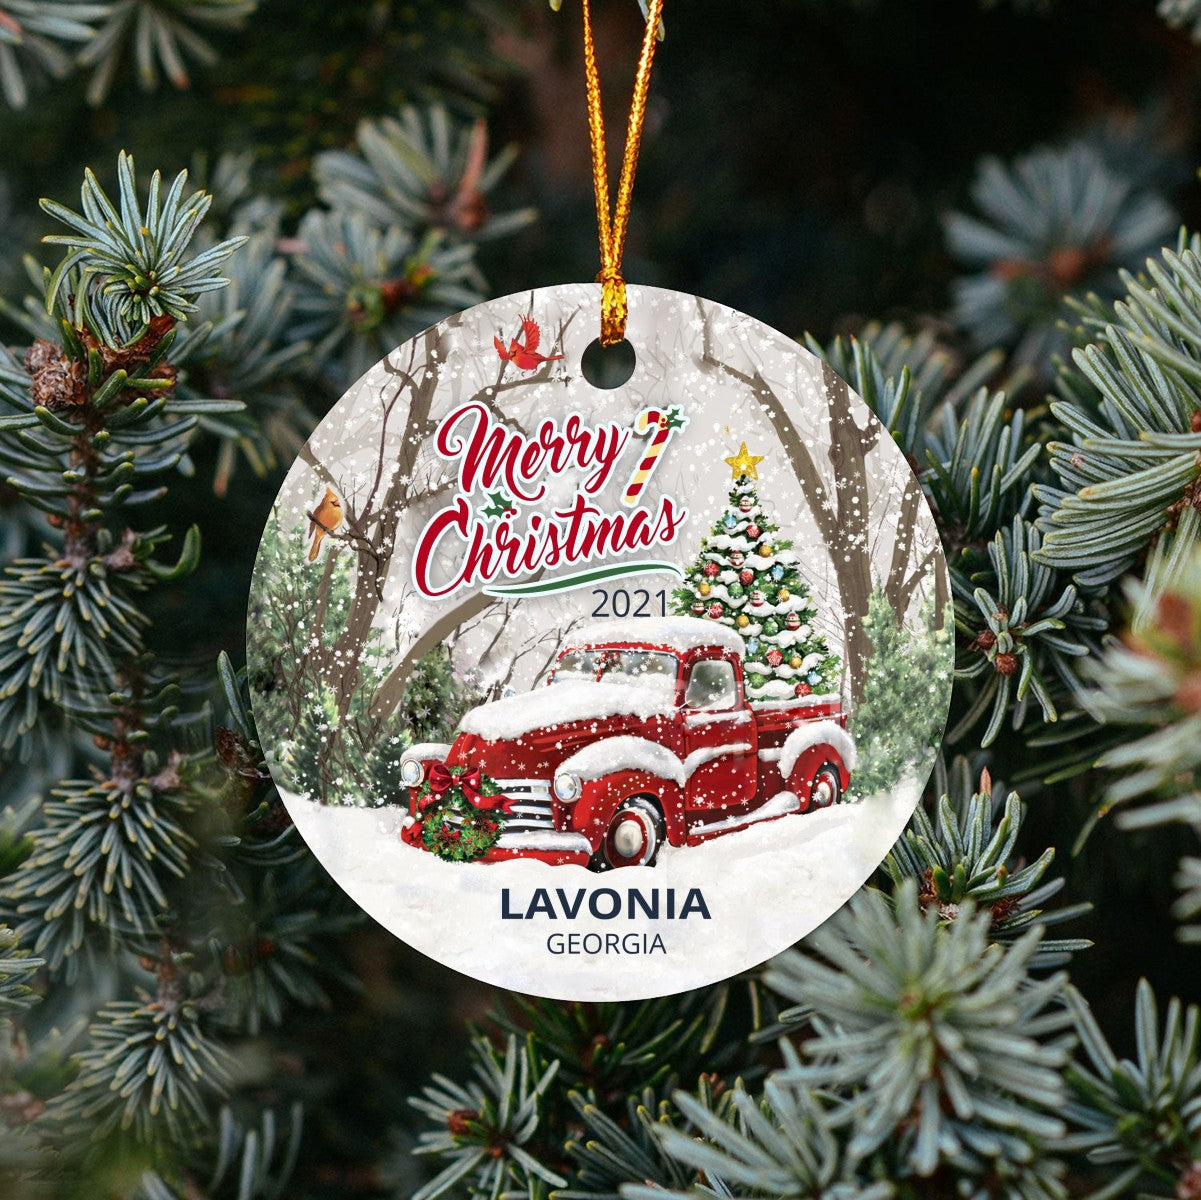 Christmas Tree Ornaments Lavonia - Ornament Customize With Name City And State Lavonia Georgia GA - Red Truck Xmas Ornaments 3'' Plastic Gift For Family, Friend And Housewarming